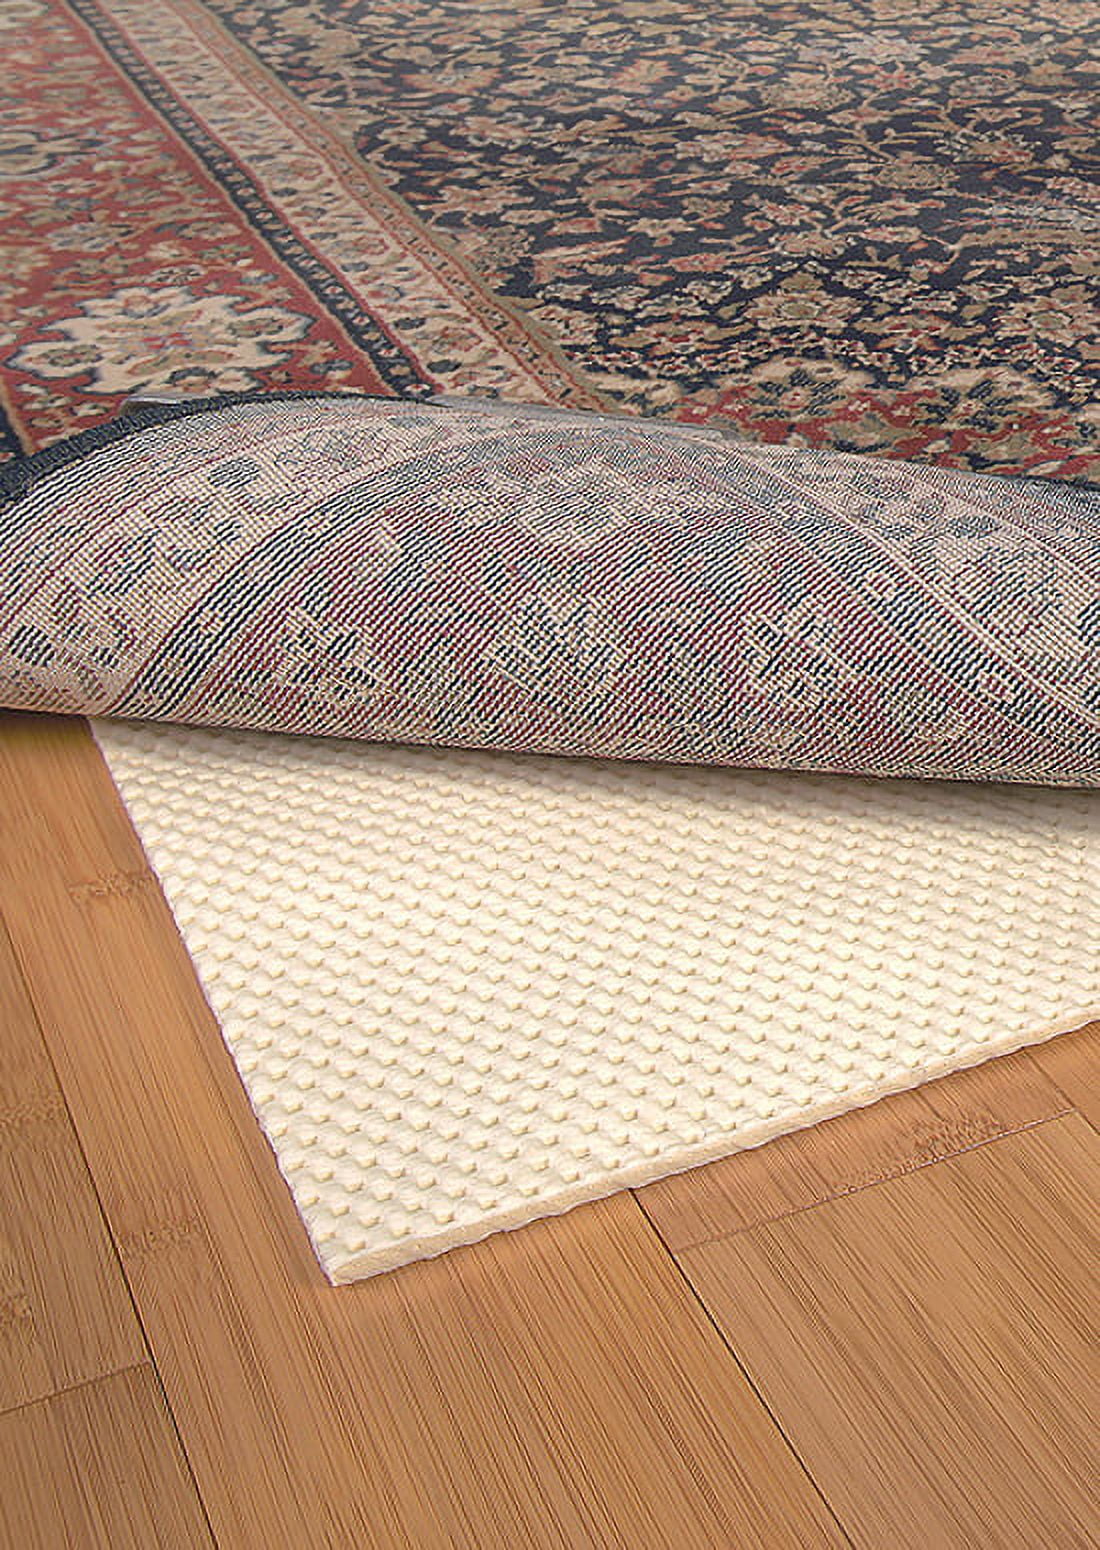 RUGPADUSA - Super-Lock Natural - 2'x6' - 1/8 Thick - Natural Rubber -  Gripping Open Weave Rug Pad - More Durable Than PVC Alternatives, Safe for  All